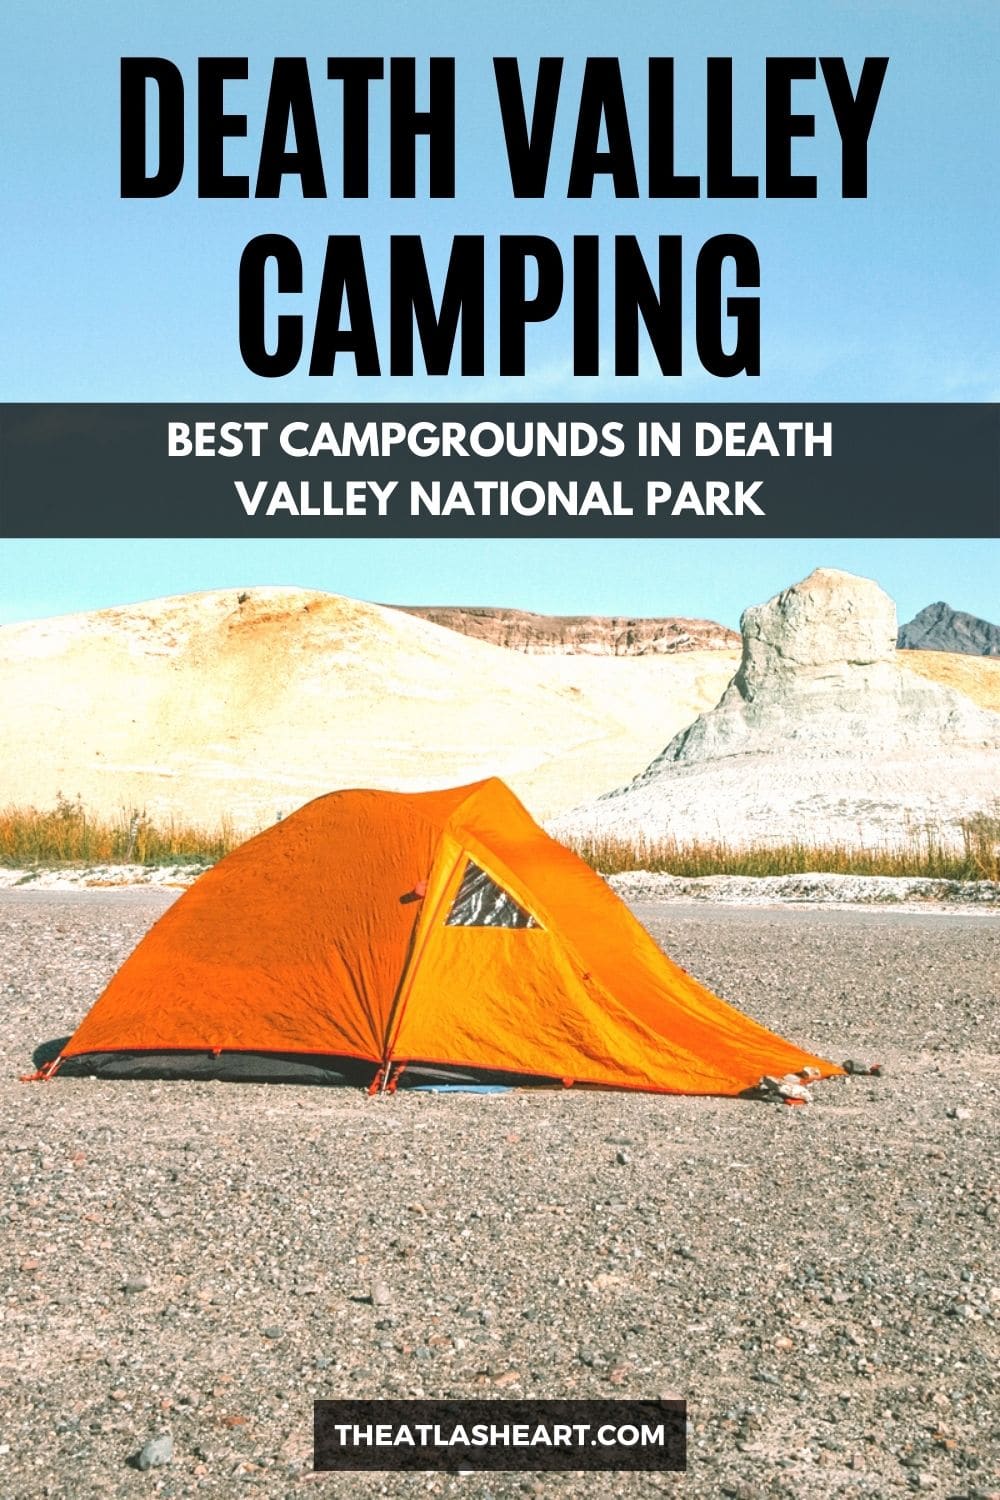 Death Valley Camping: Best Campgrounds in Death Valley National Park